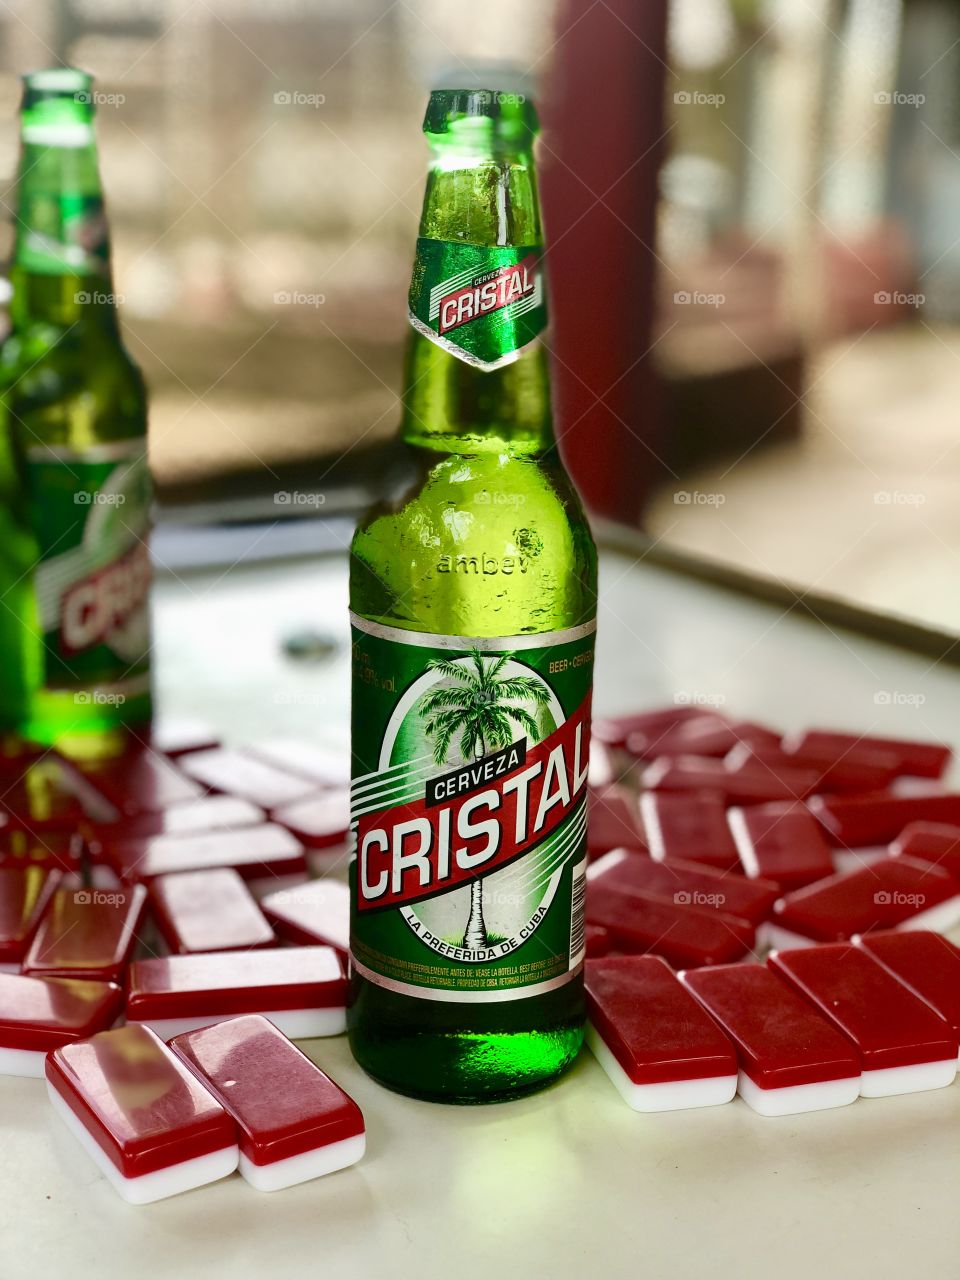 Cuban Cristal beer and dominoes 